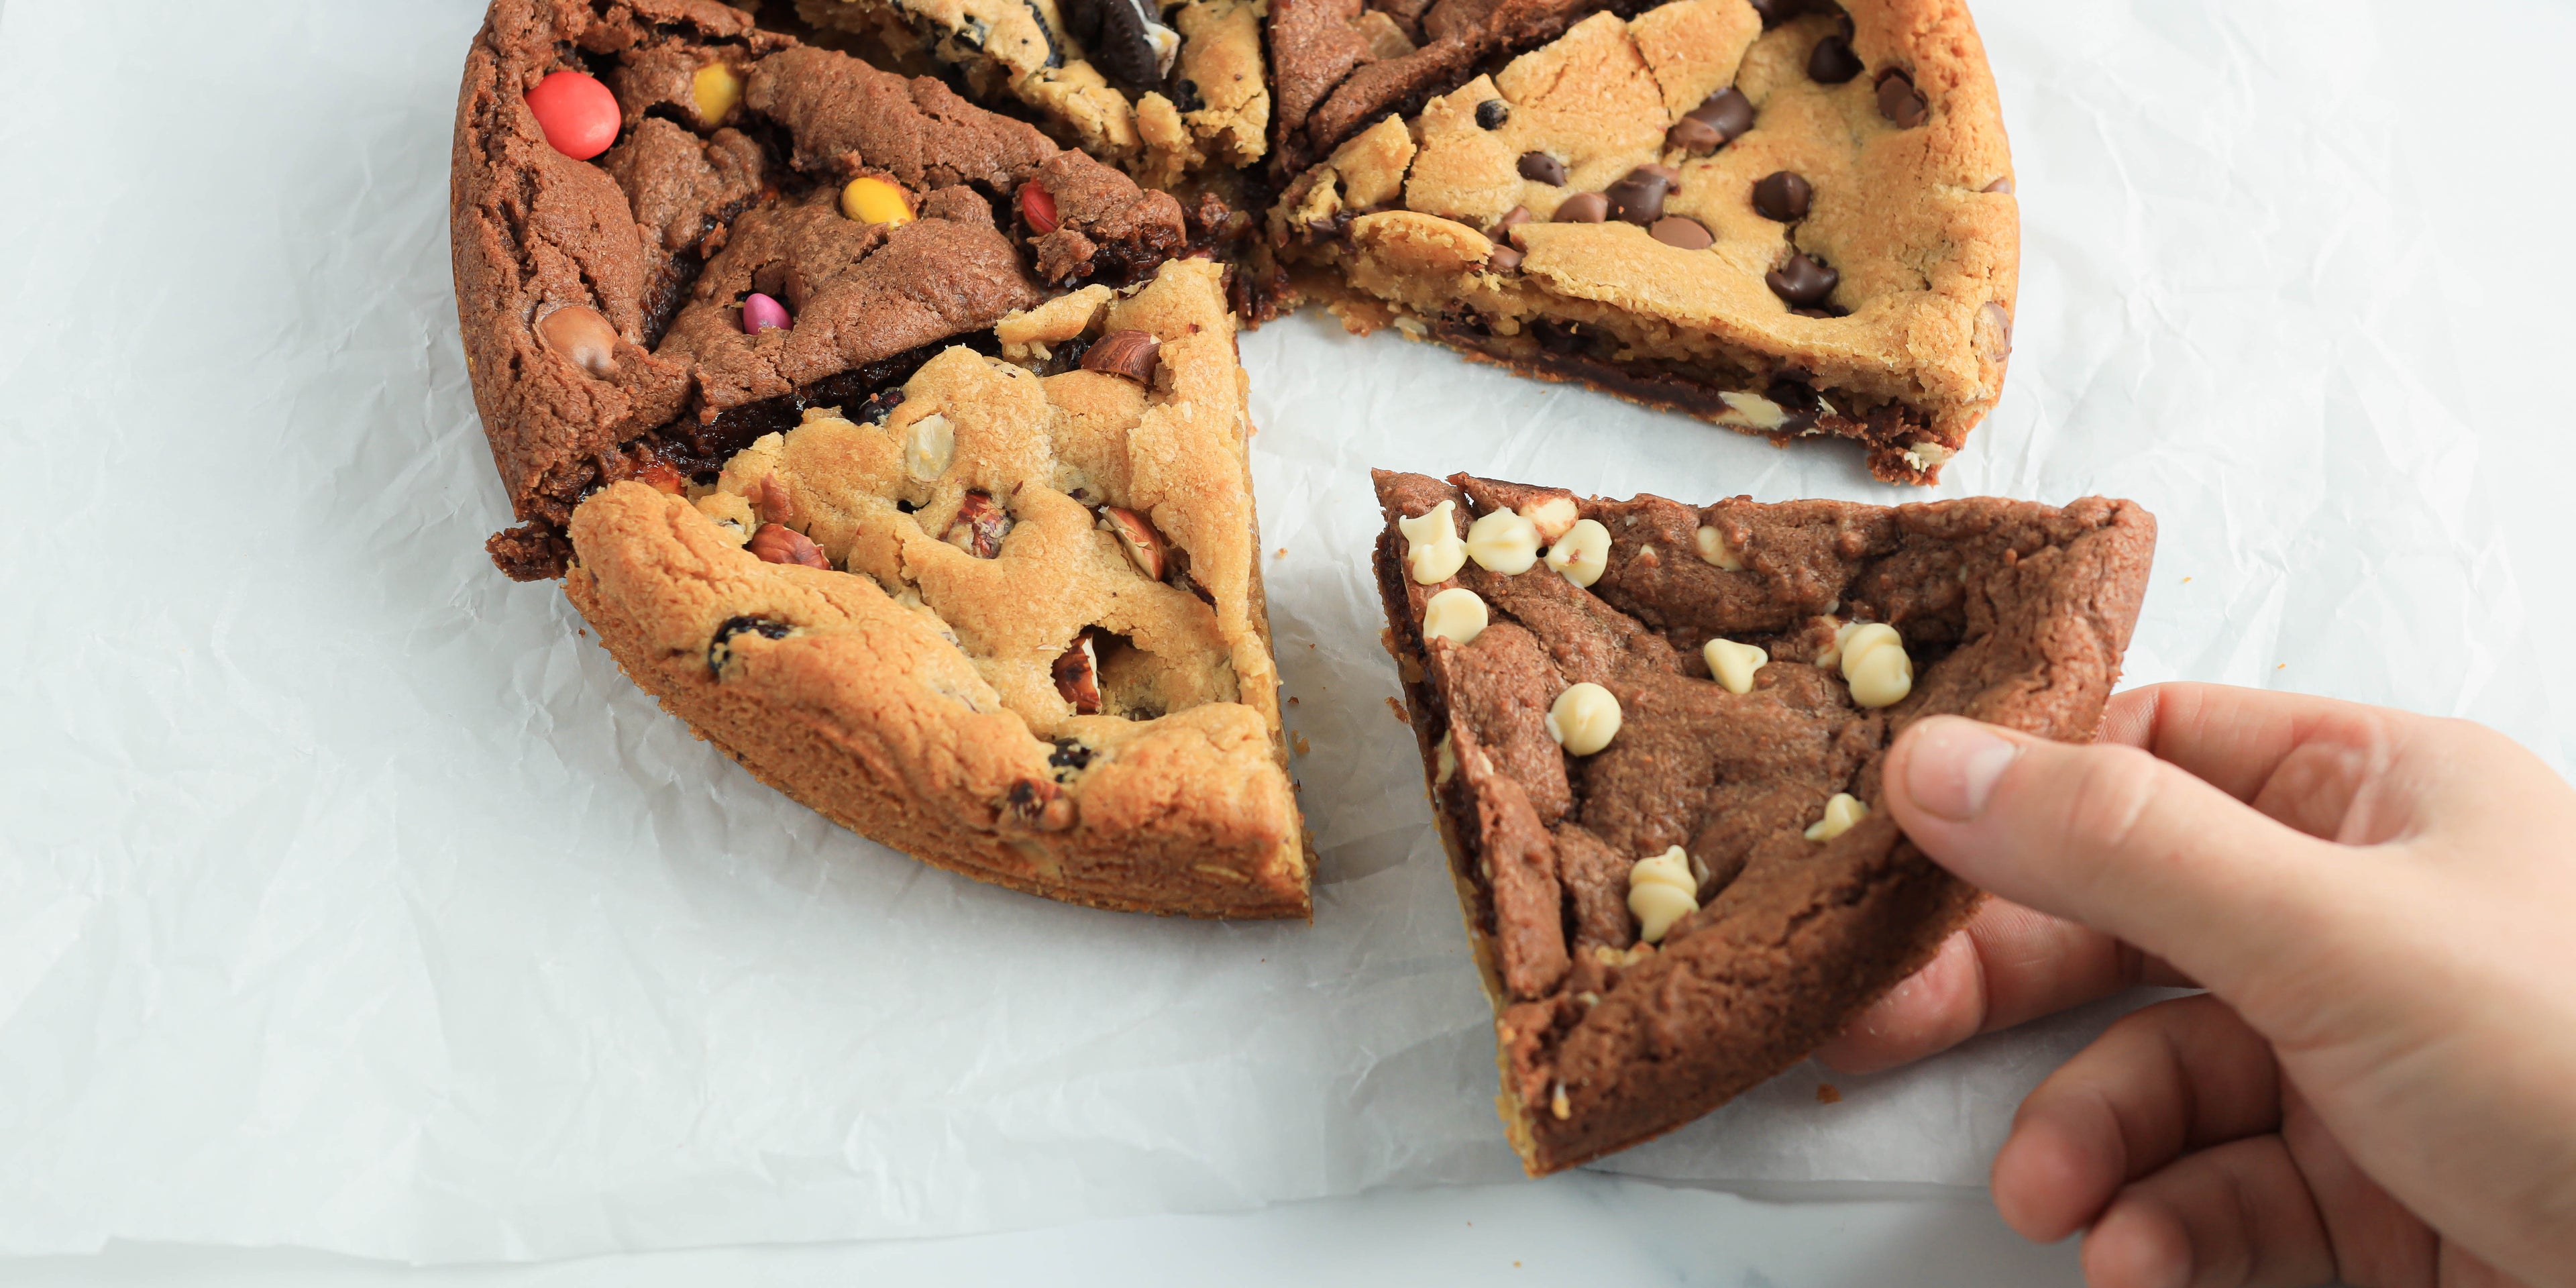 Hand reaching in taking a slice of chocolate cookie with white chocolate chips from a sliced up cookie cake